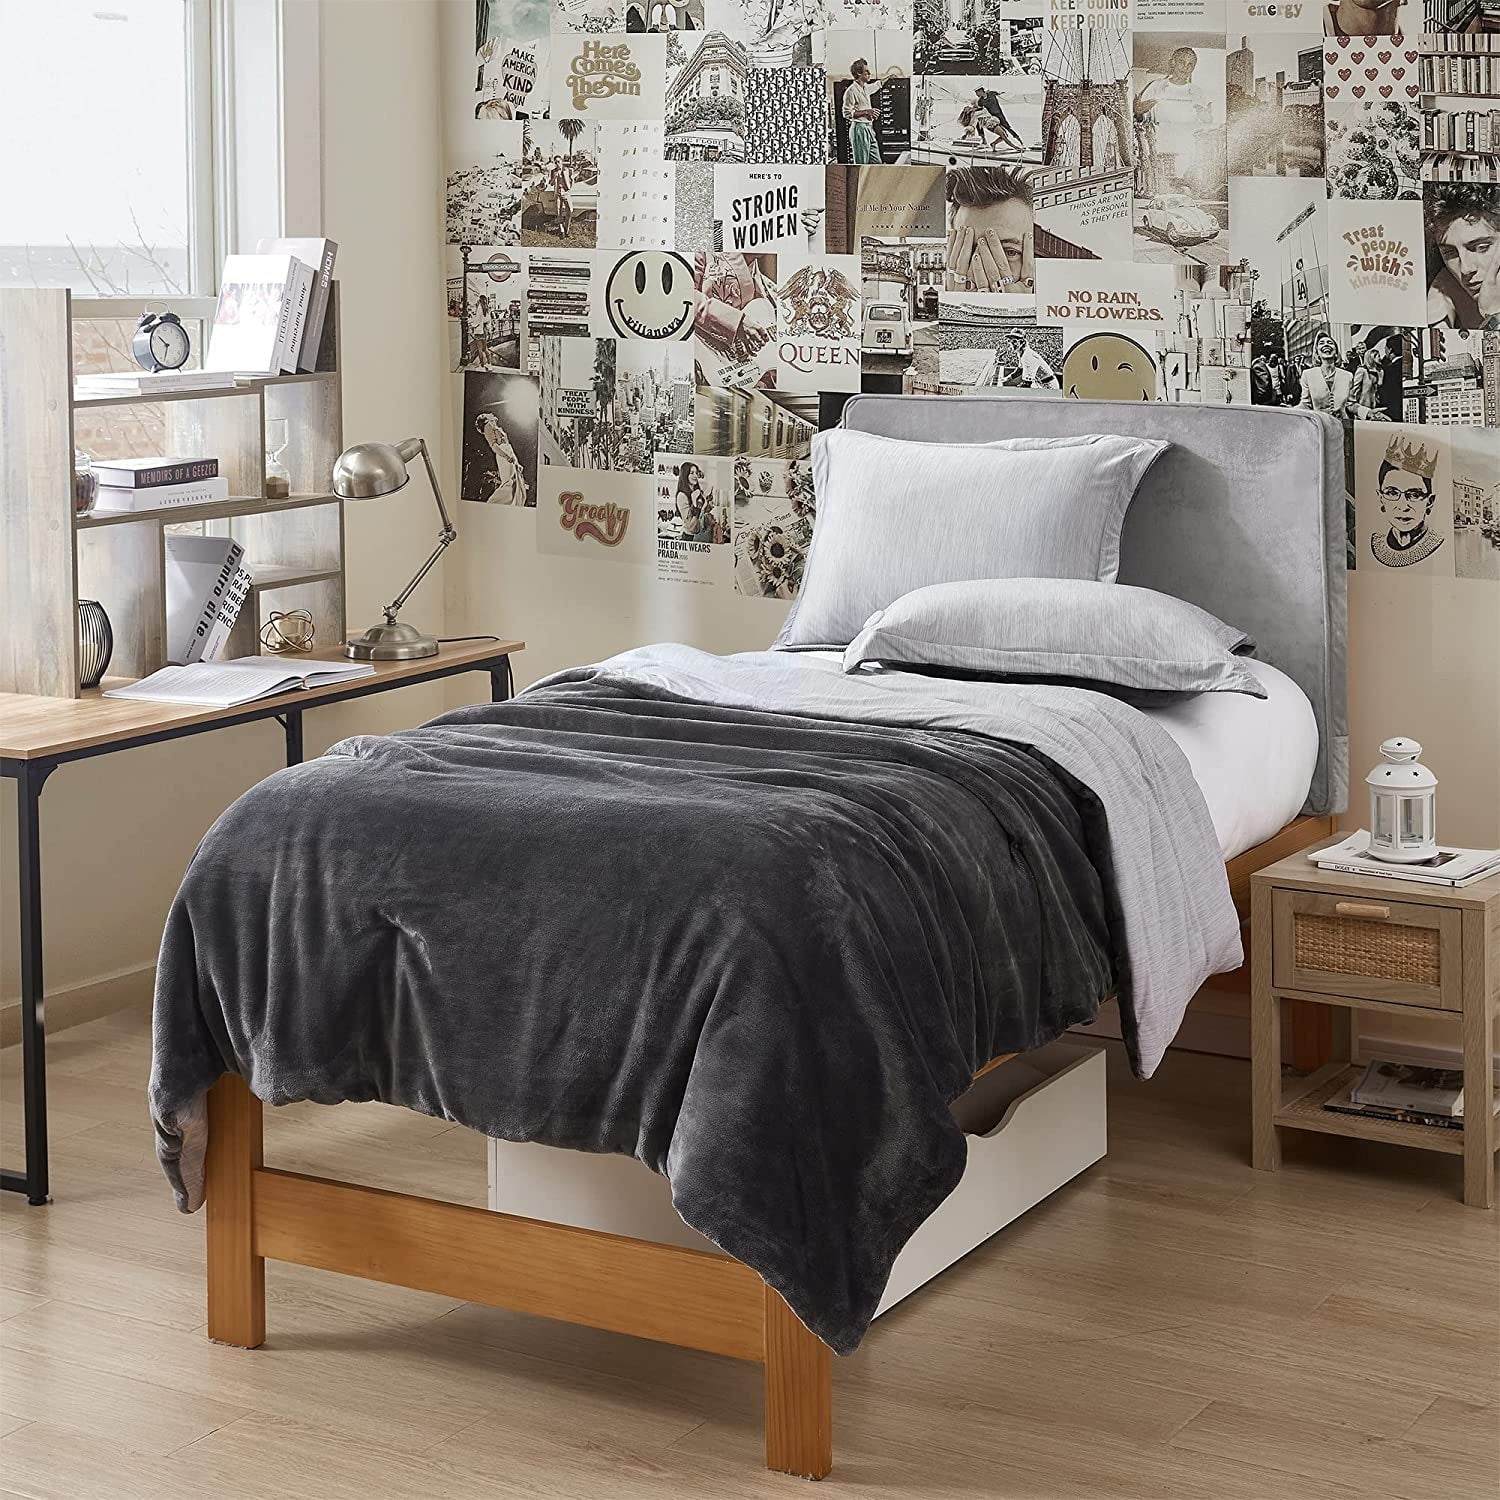 Byourbed Some Like it Hot - Some Like it Cold - Coma Inducer® Oversized Comforter  Set - Cooling Gray Cooling Gray - Twin XL 